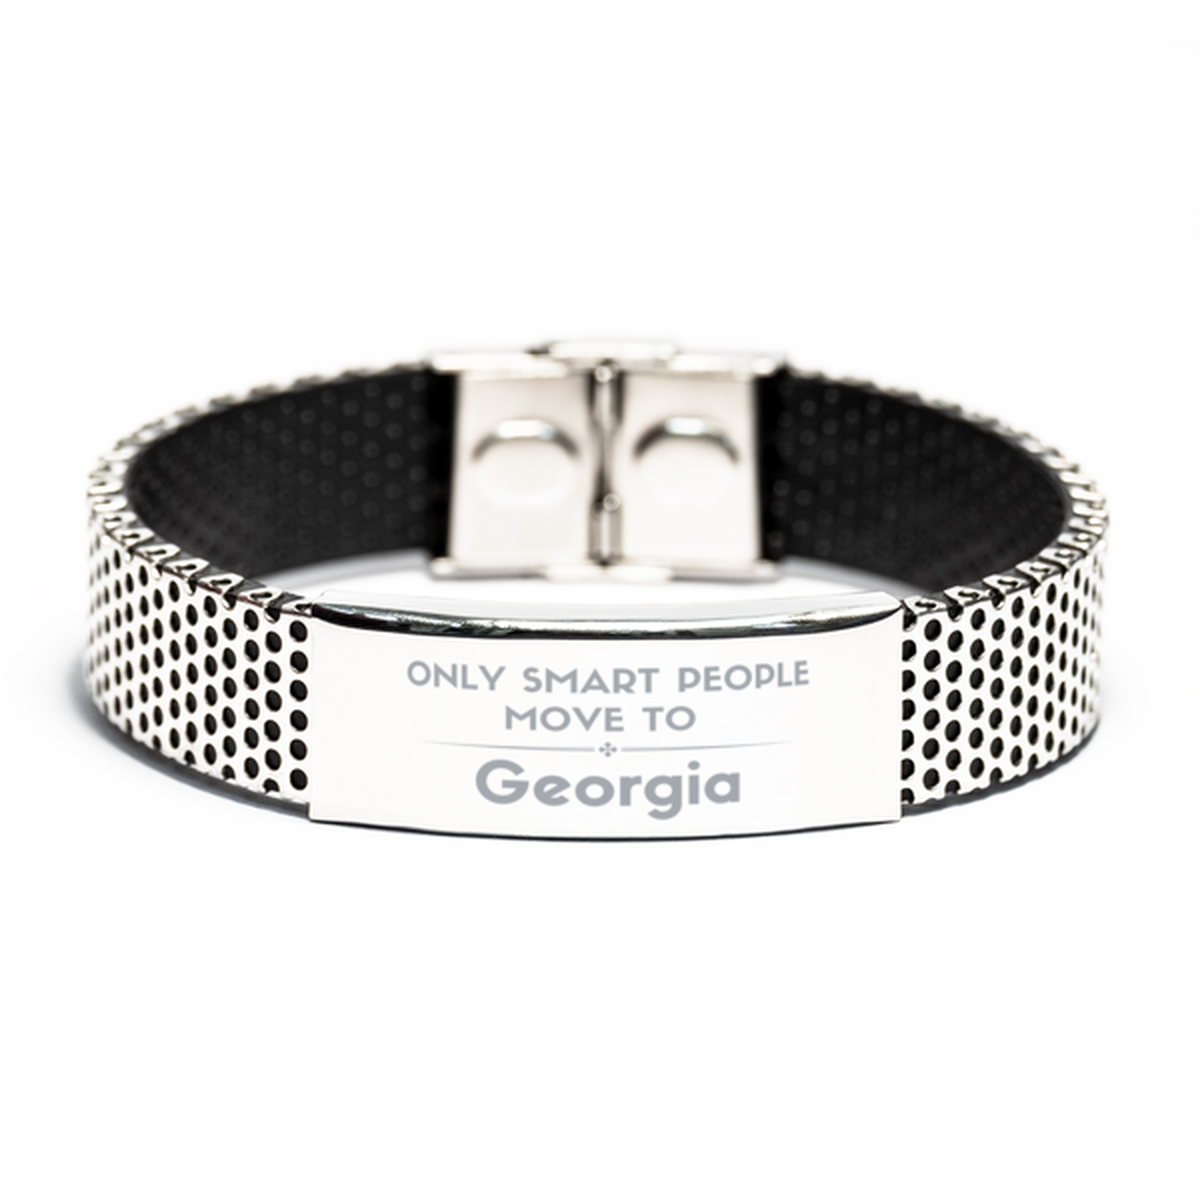 Only smart people move to Georgia Stainless Steel Bracelet, Gag Gifts For Georgia, Move to Georgia Gifts for Friends Coworker Funny Saying Quote